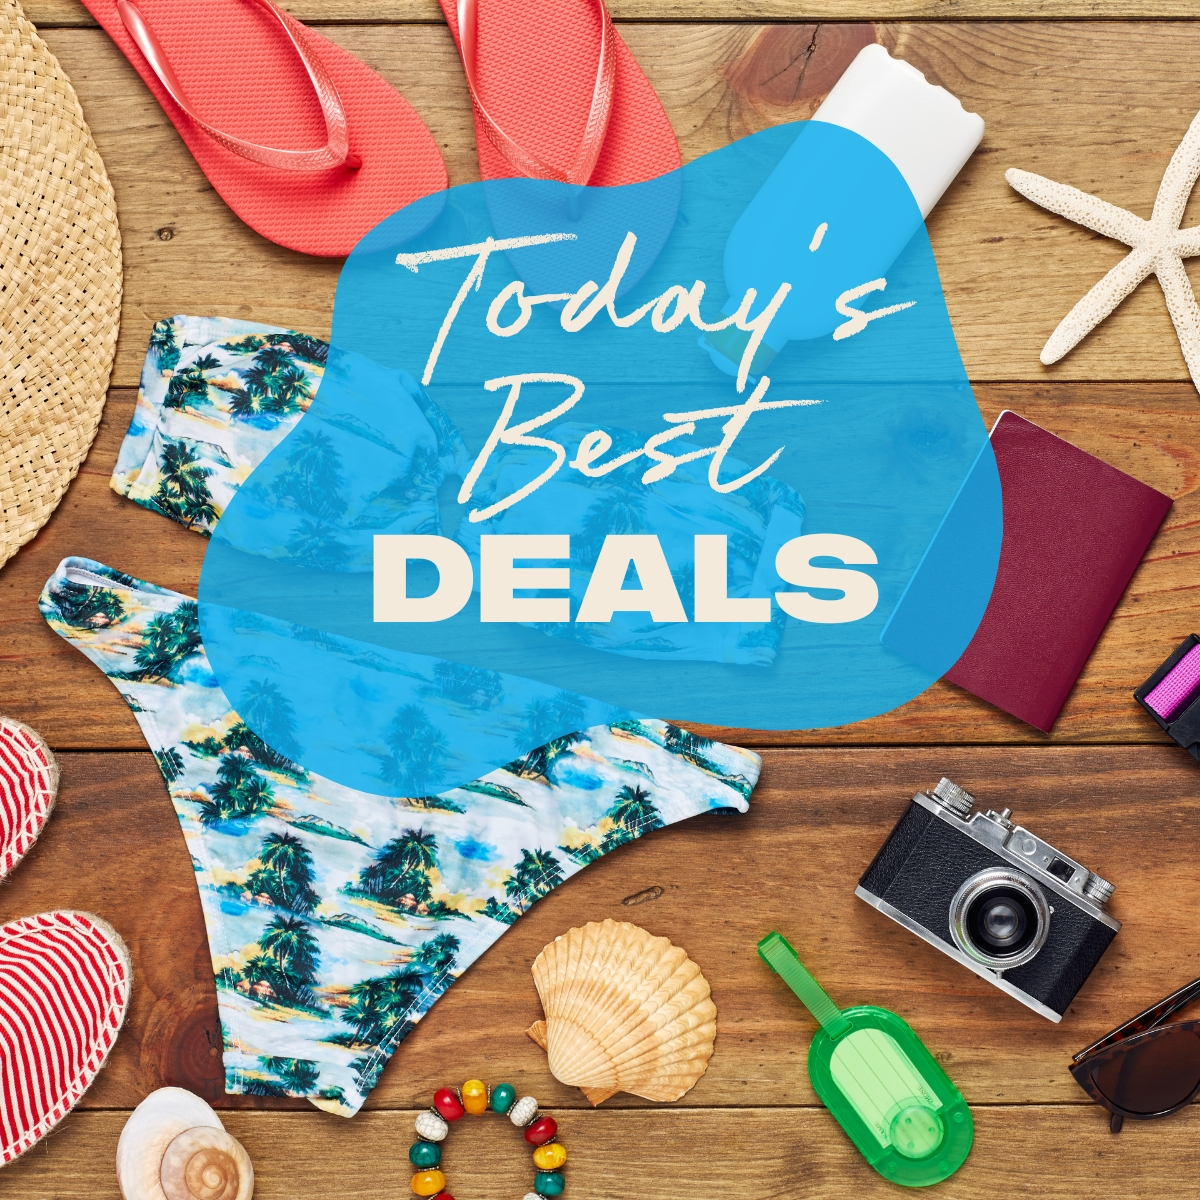 Save 50% on Thousands of Target Items, 70% on Gap & Memorial Day Deals